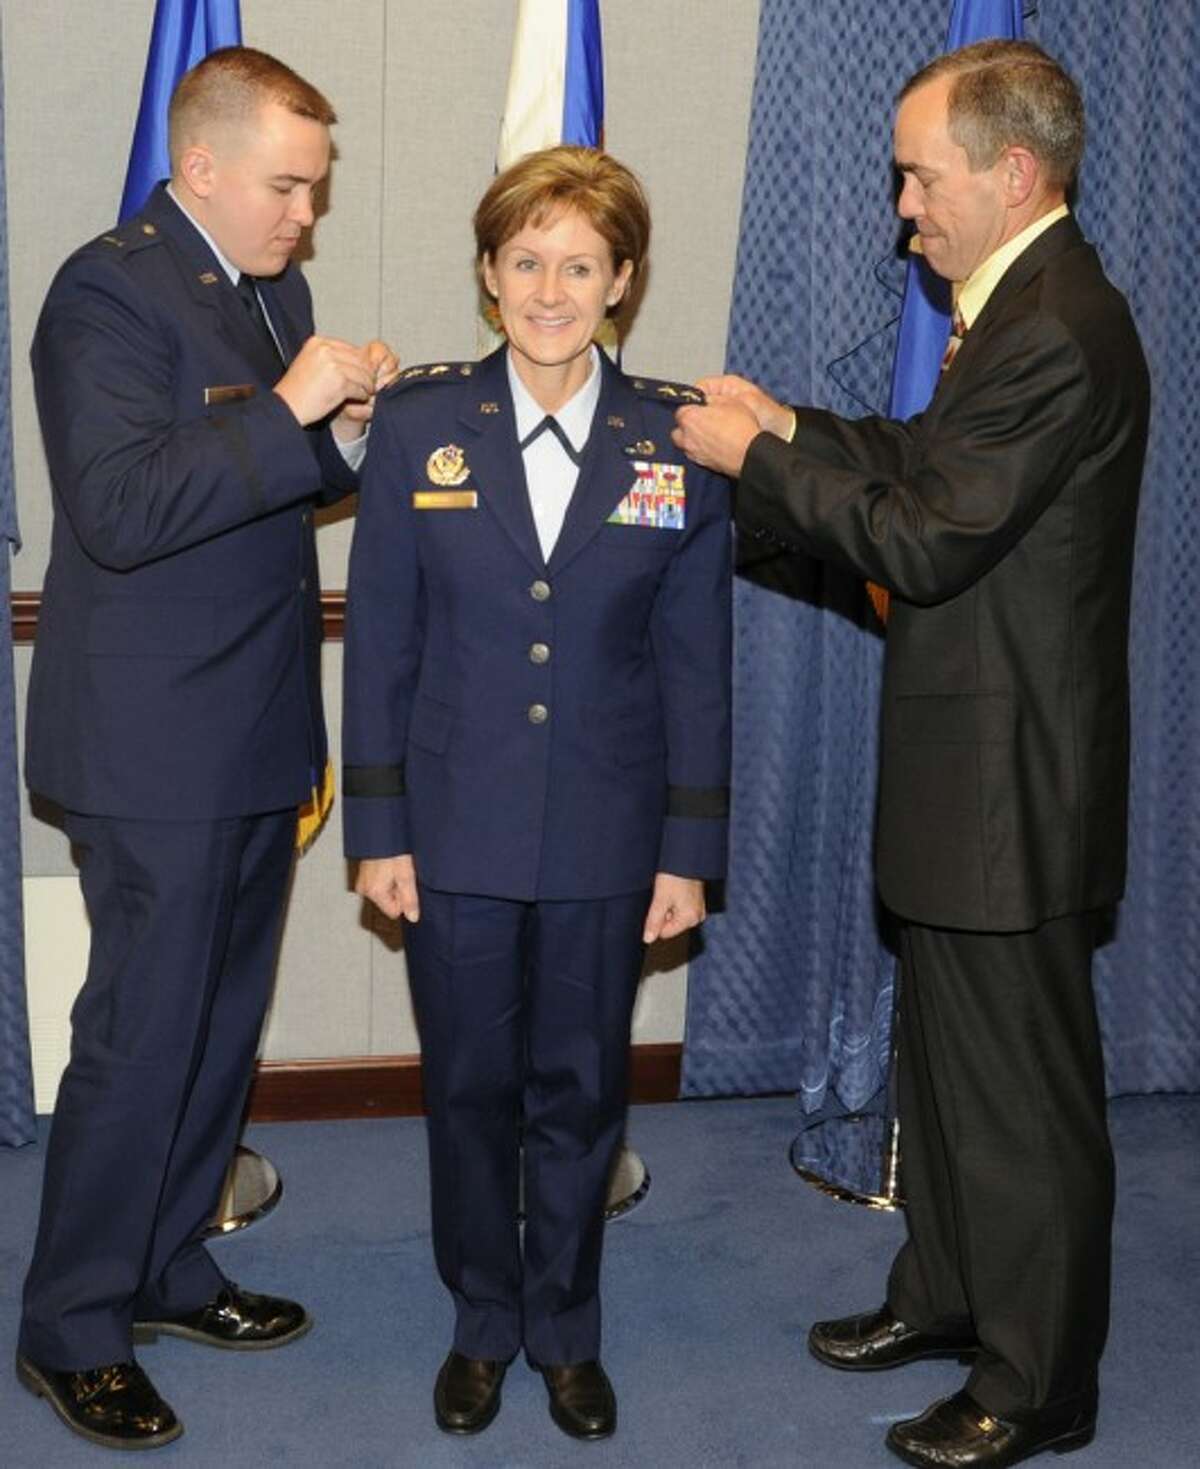 Air Force Lt. Gen. Judith Fedder is shown getting a new star pinned on her shoulders by her husband and son when she received a promotion to her current rank. Fedder was recently honored by Michigan State University with the Distinguished Alumni Award.